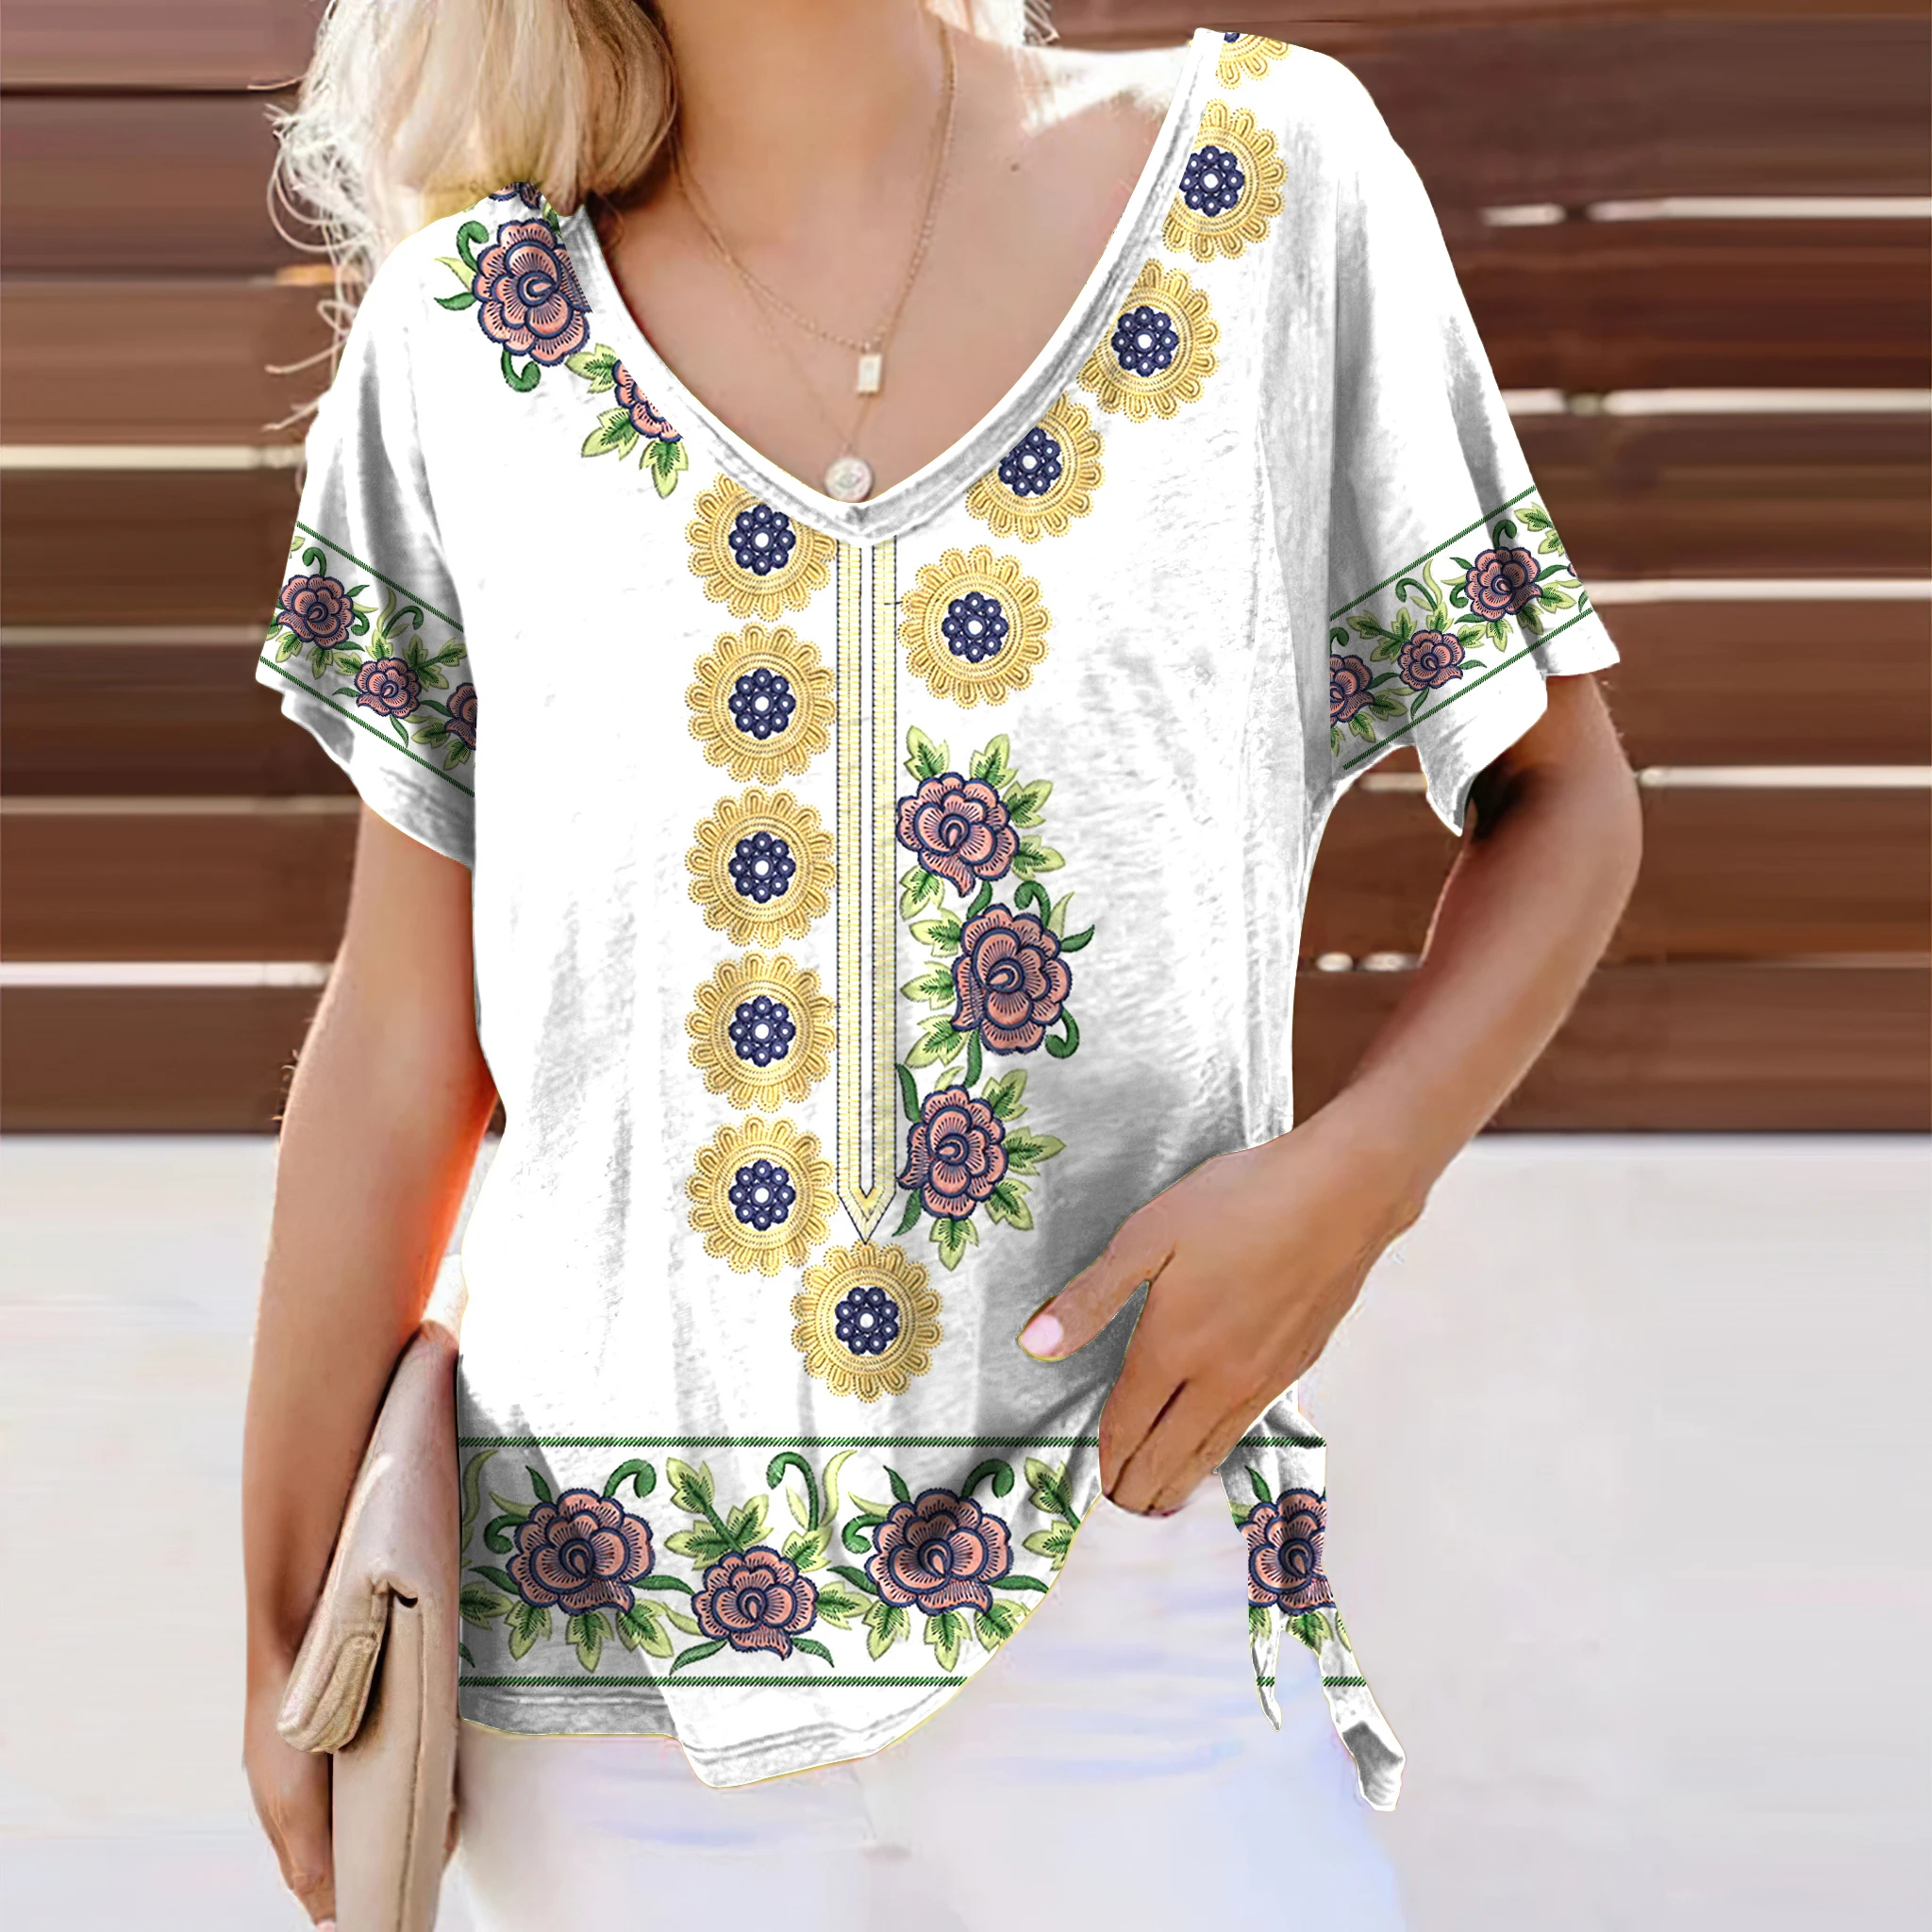 XS-8XL Women's Fashion Summer Clothes Casual O-neck Short Sleeved Tops  Ladies Retro Ethnic Style Floral Printed Blouses Loose T-shirts Plus Size  Cotton Shirts Bohemian Casual Shirts T shirts Blouse Tops